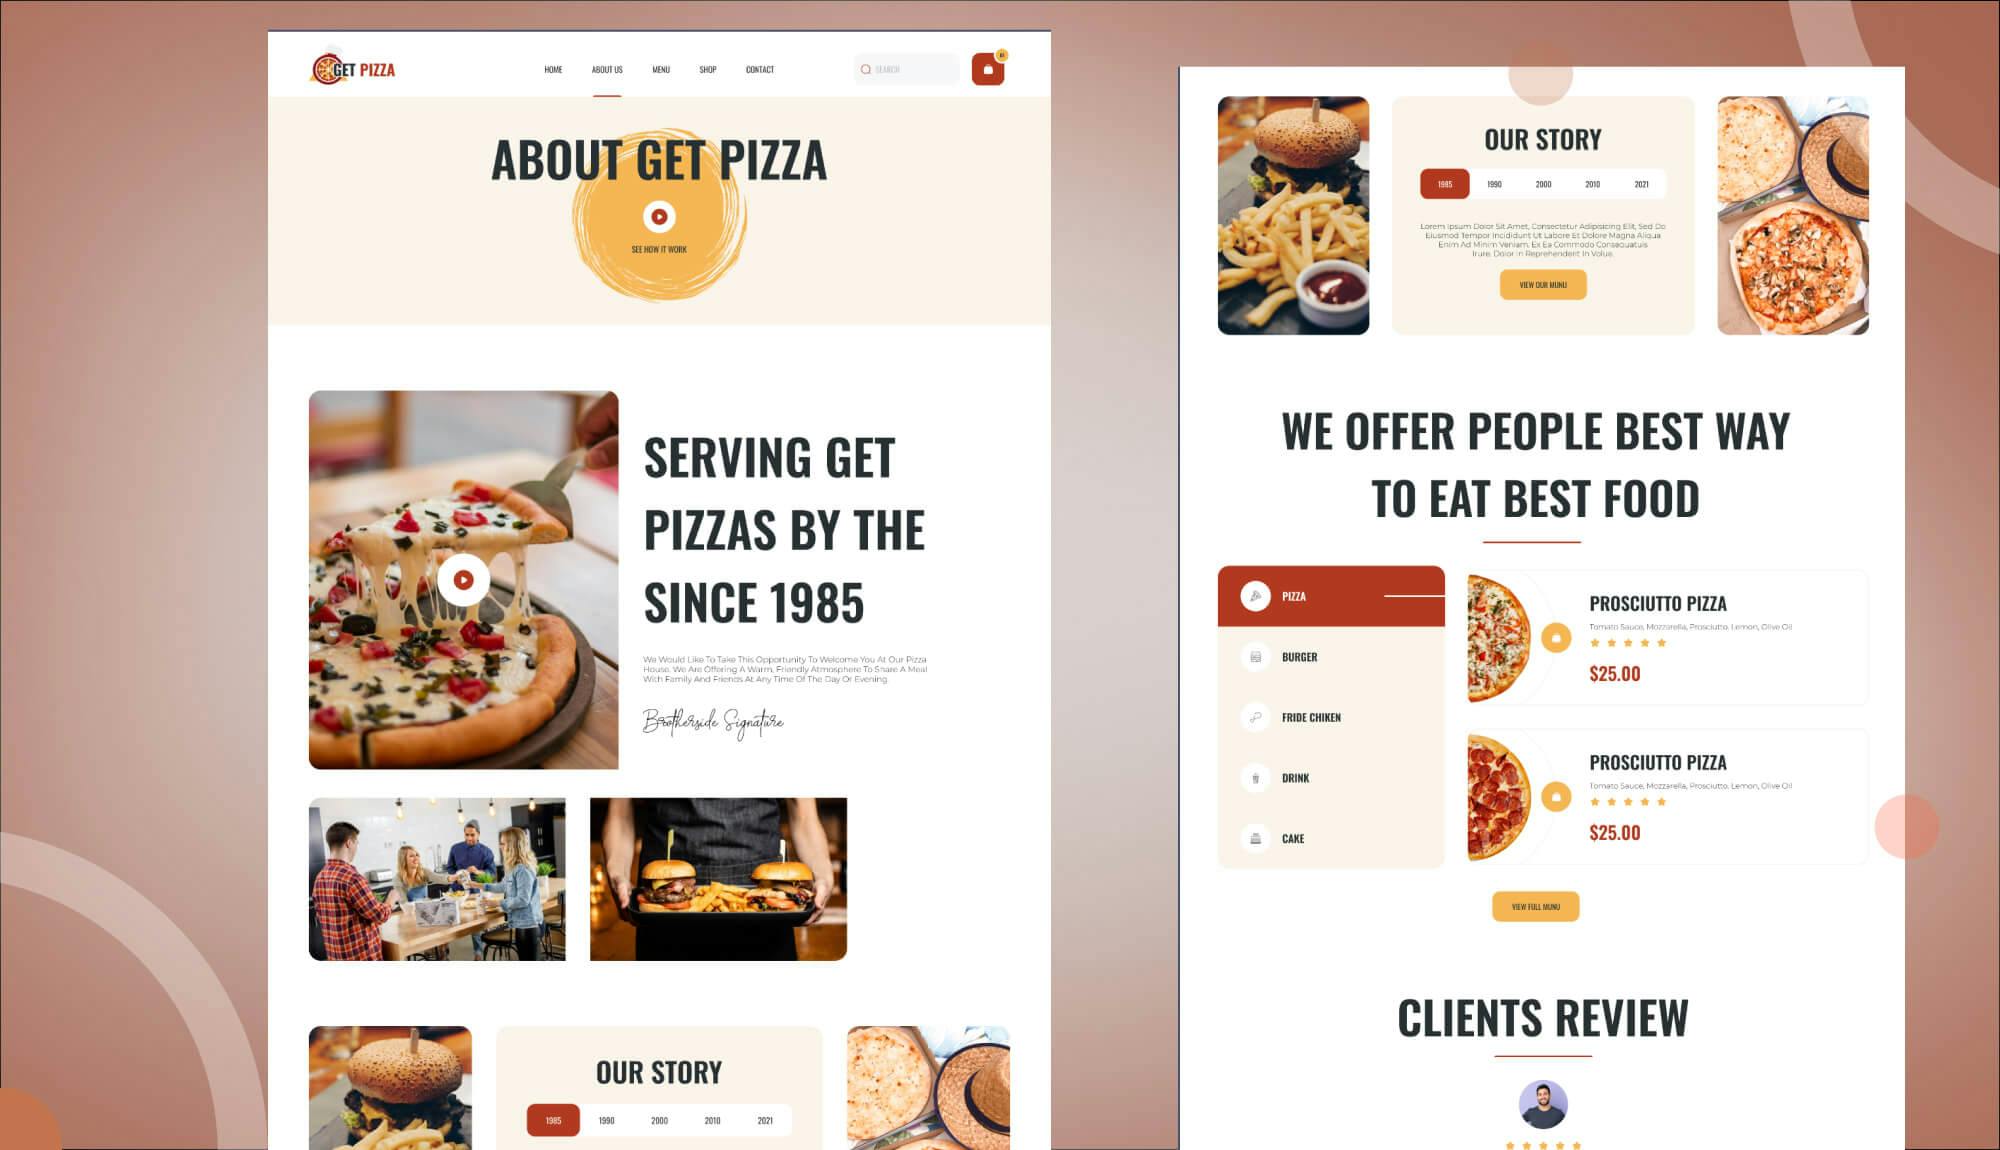 Get Pizza About Page Banner